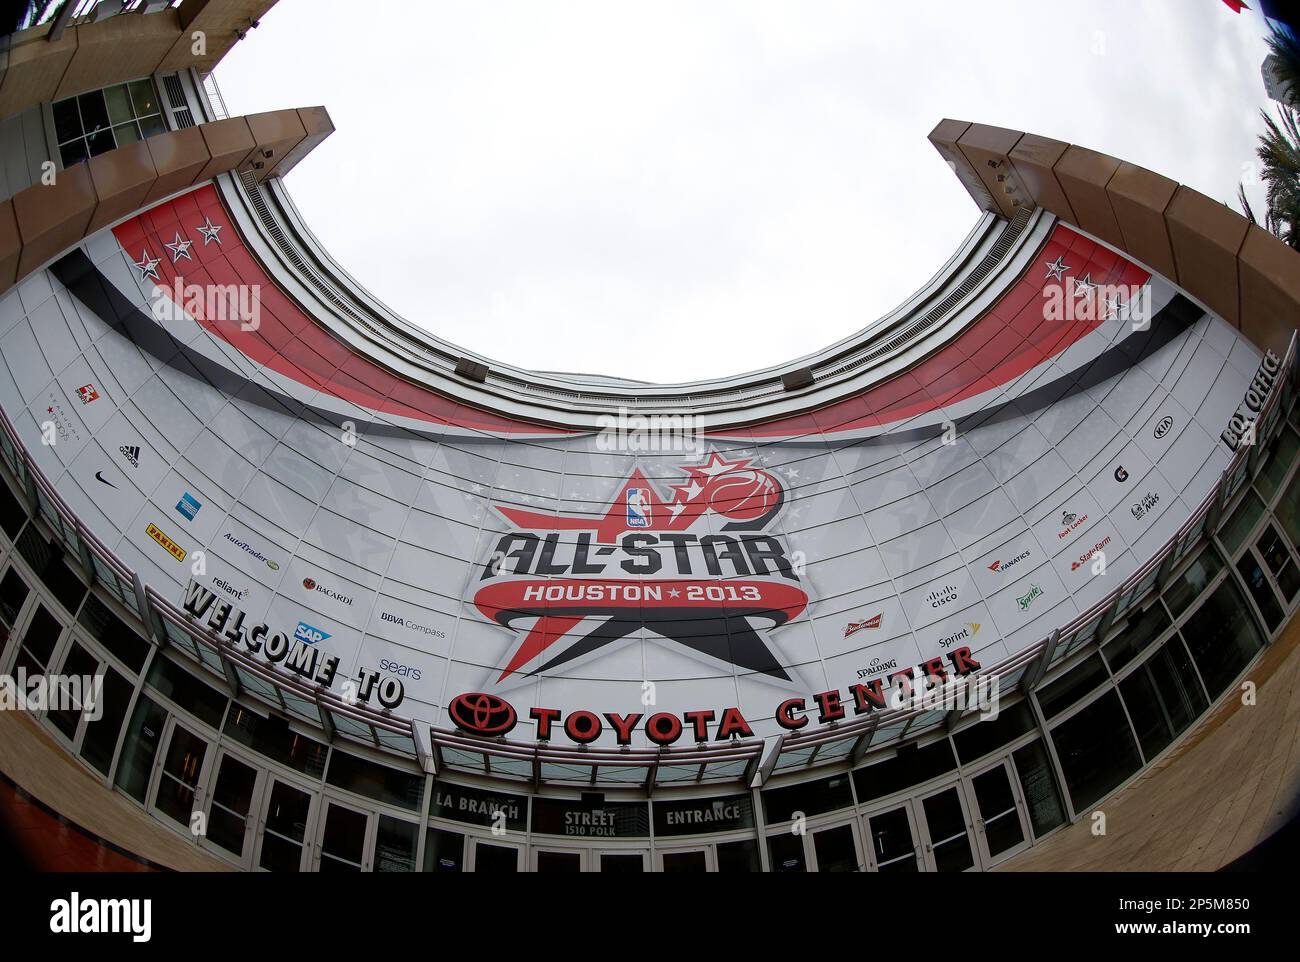 2013 NBA All-Star Game in Houston